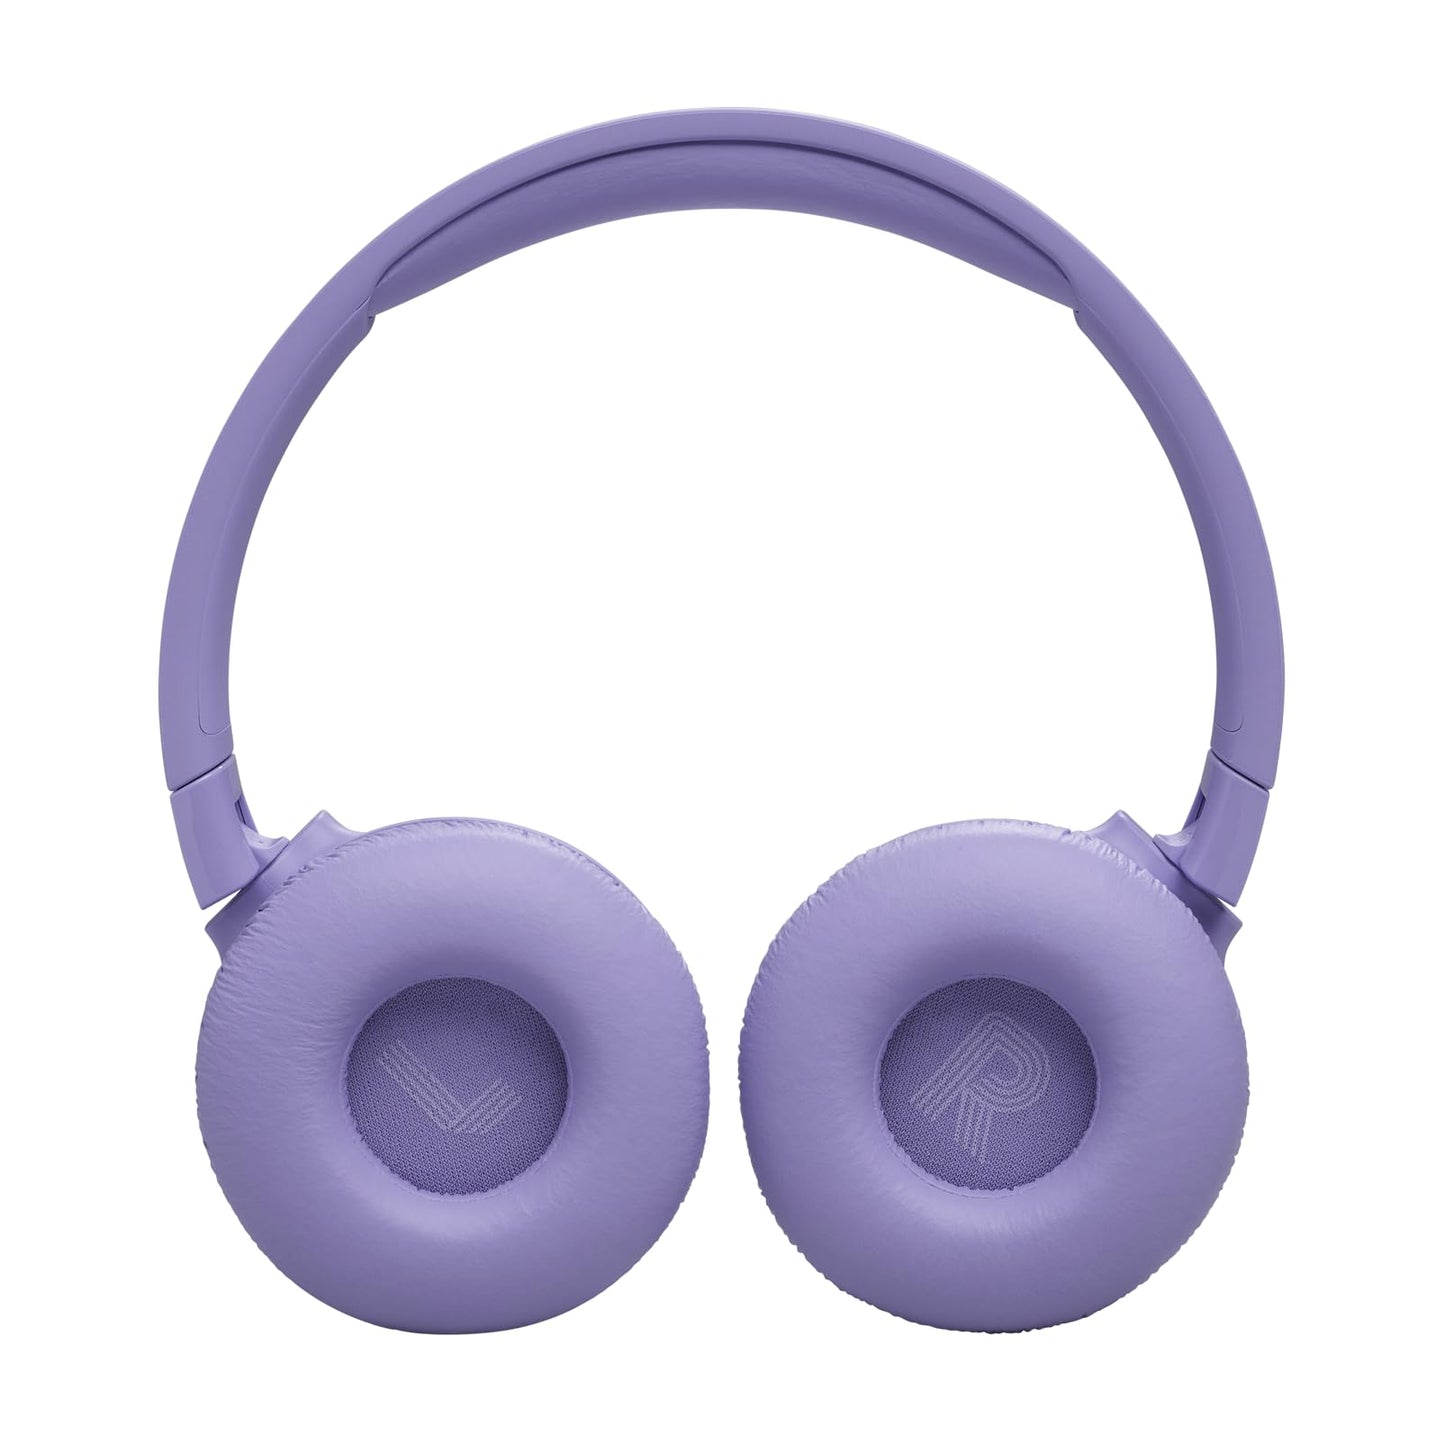 JBL Tune 670NC Adaptive Noise Cancelling Wireless On-Ear Headphones, Pure Bass, Smart Ambient, Bluetooth 5.3 + LE Audio, Hands-Free Call, 70H Battery, Multi-Point Connection - Purple, JBLT670NCPUR